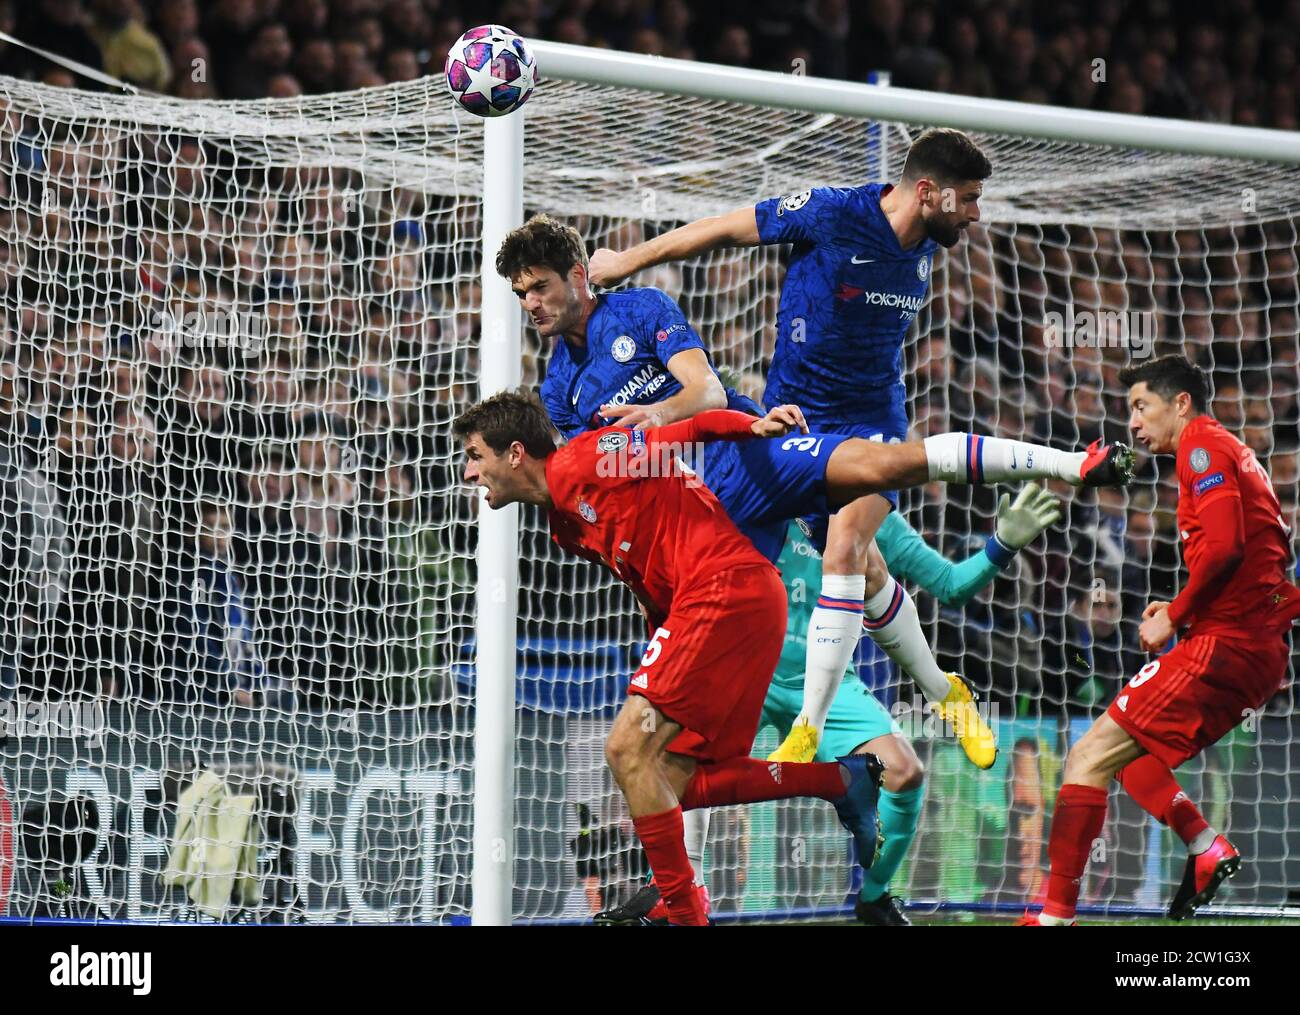 LONDON, ENGLAND - FEBRUARY 26, 2020: Thomas Muller of Bayern, Marcos Alonso of Chelsea, Olivier Giroud of Chelsea and Robert Lewandowski of Bayern pictured during the 2019/20 UEFA Champions League Round of 16 game between Chelsea FC and Bayern Munich at Stamford Bridge. Stock Photo